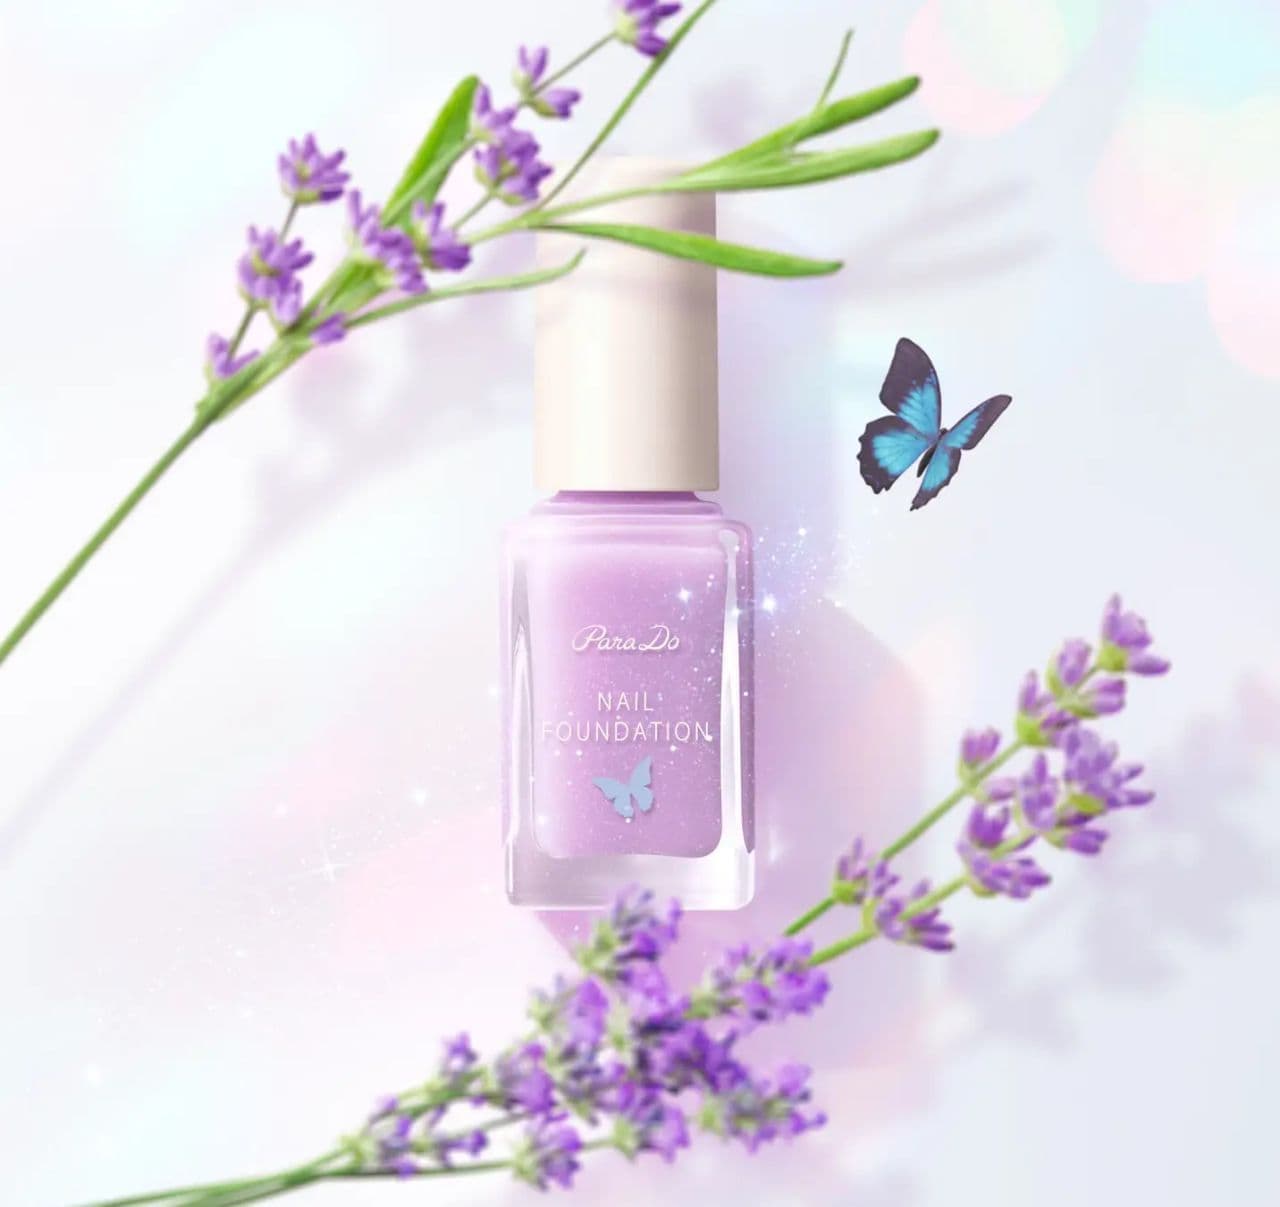 Paradoo Nail Foundation" limited color "PL01 Happiness Lavender".